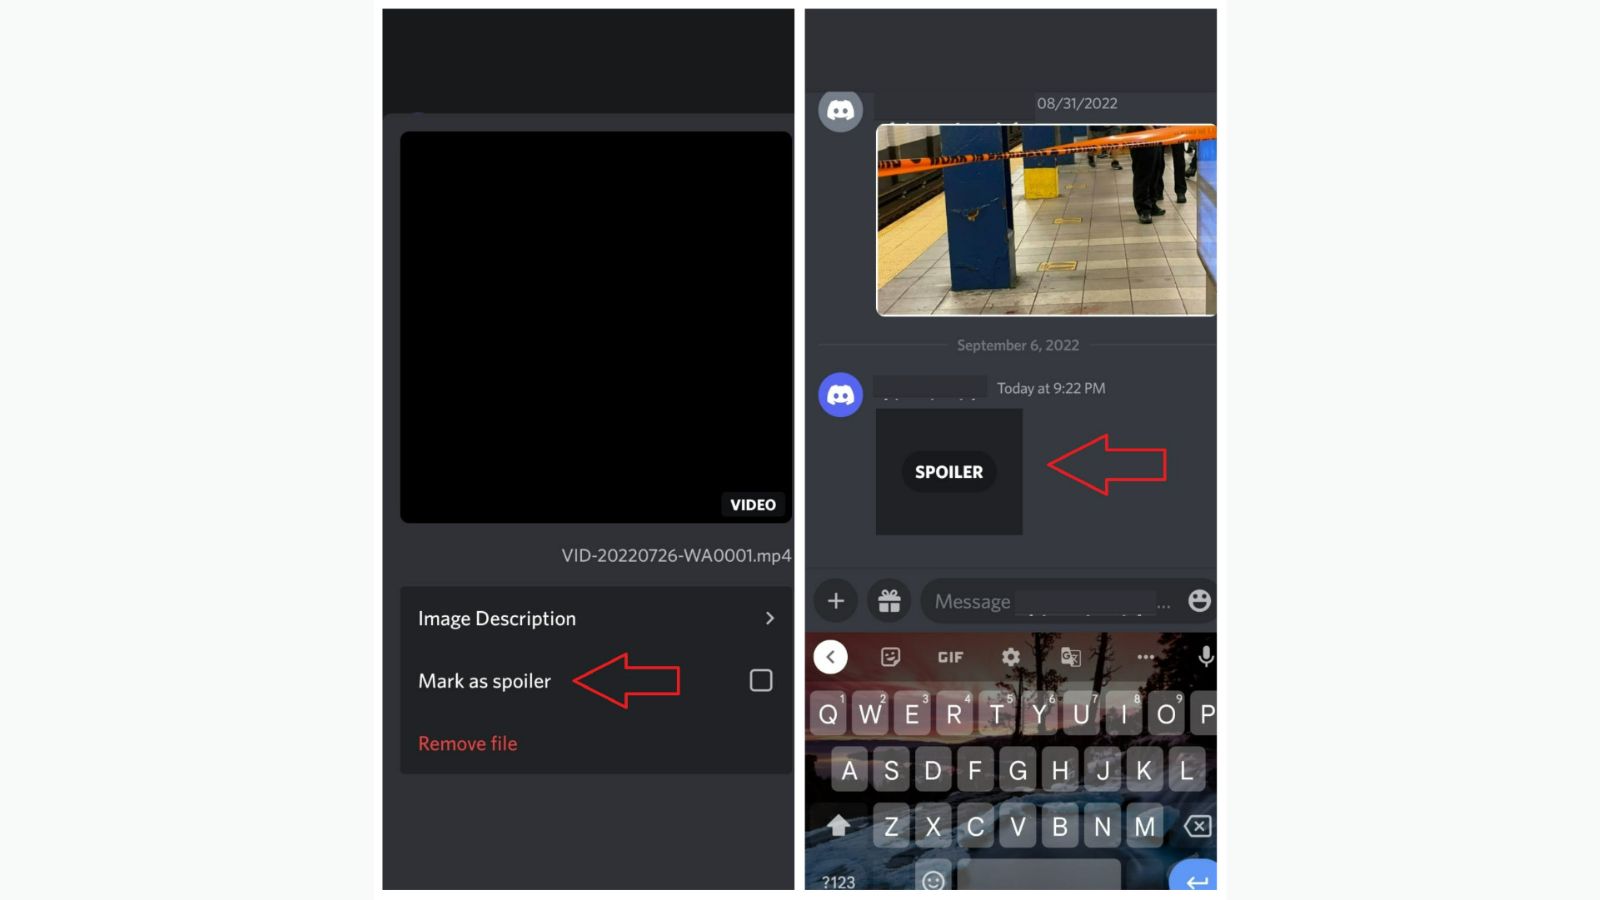 how-to-send-spoiler-images-on-discord-mobile